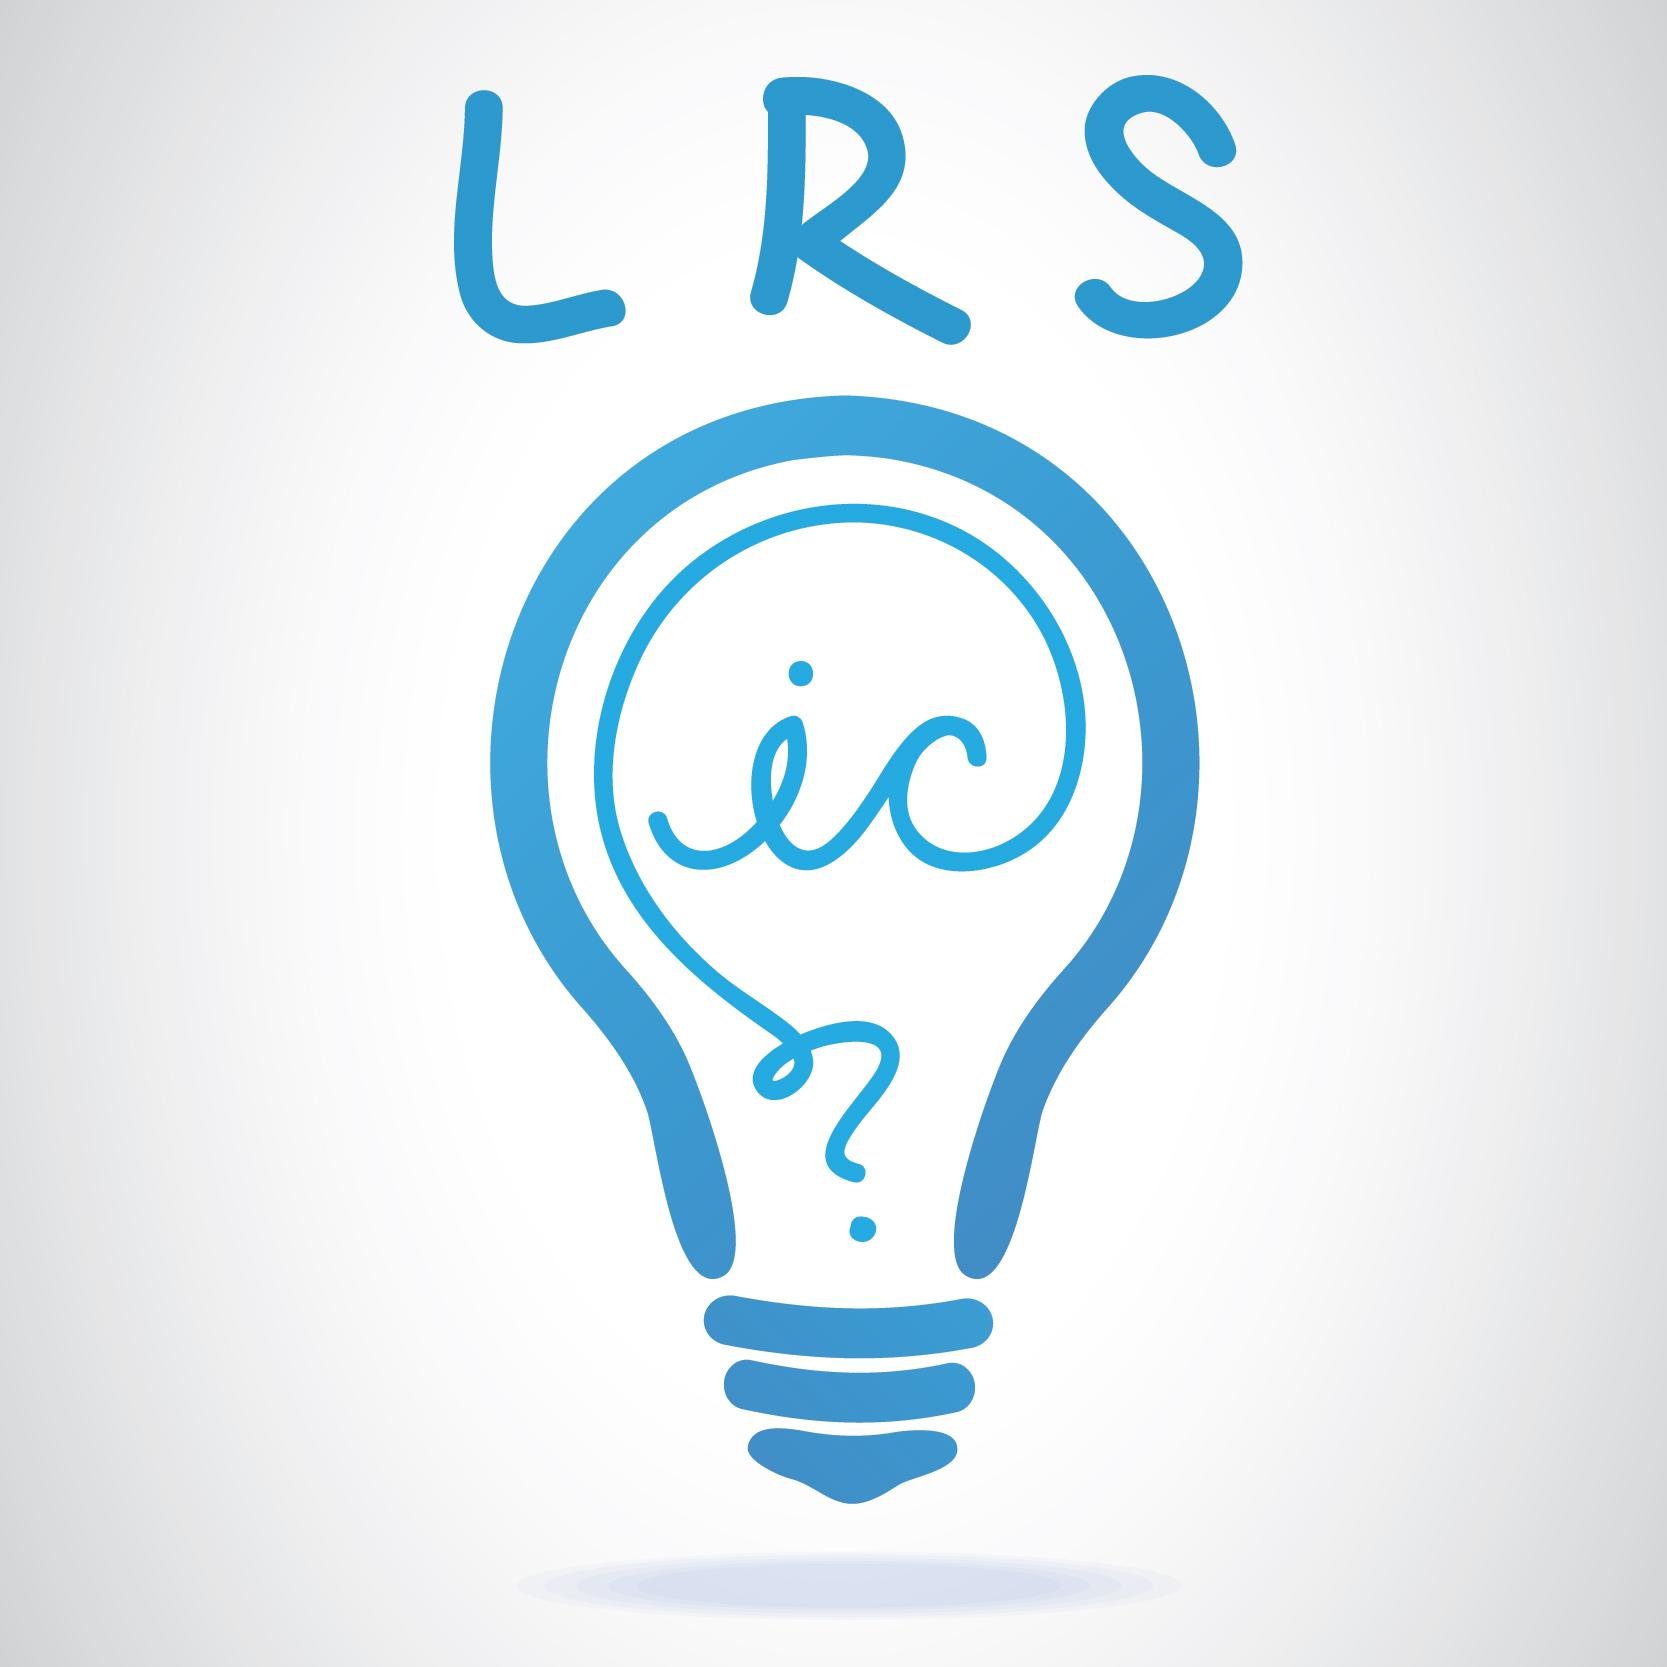 YRDSB Learning Resource Services and Innovation Commons (LRSIC) for YRDSB staff.